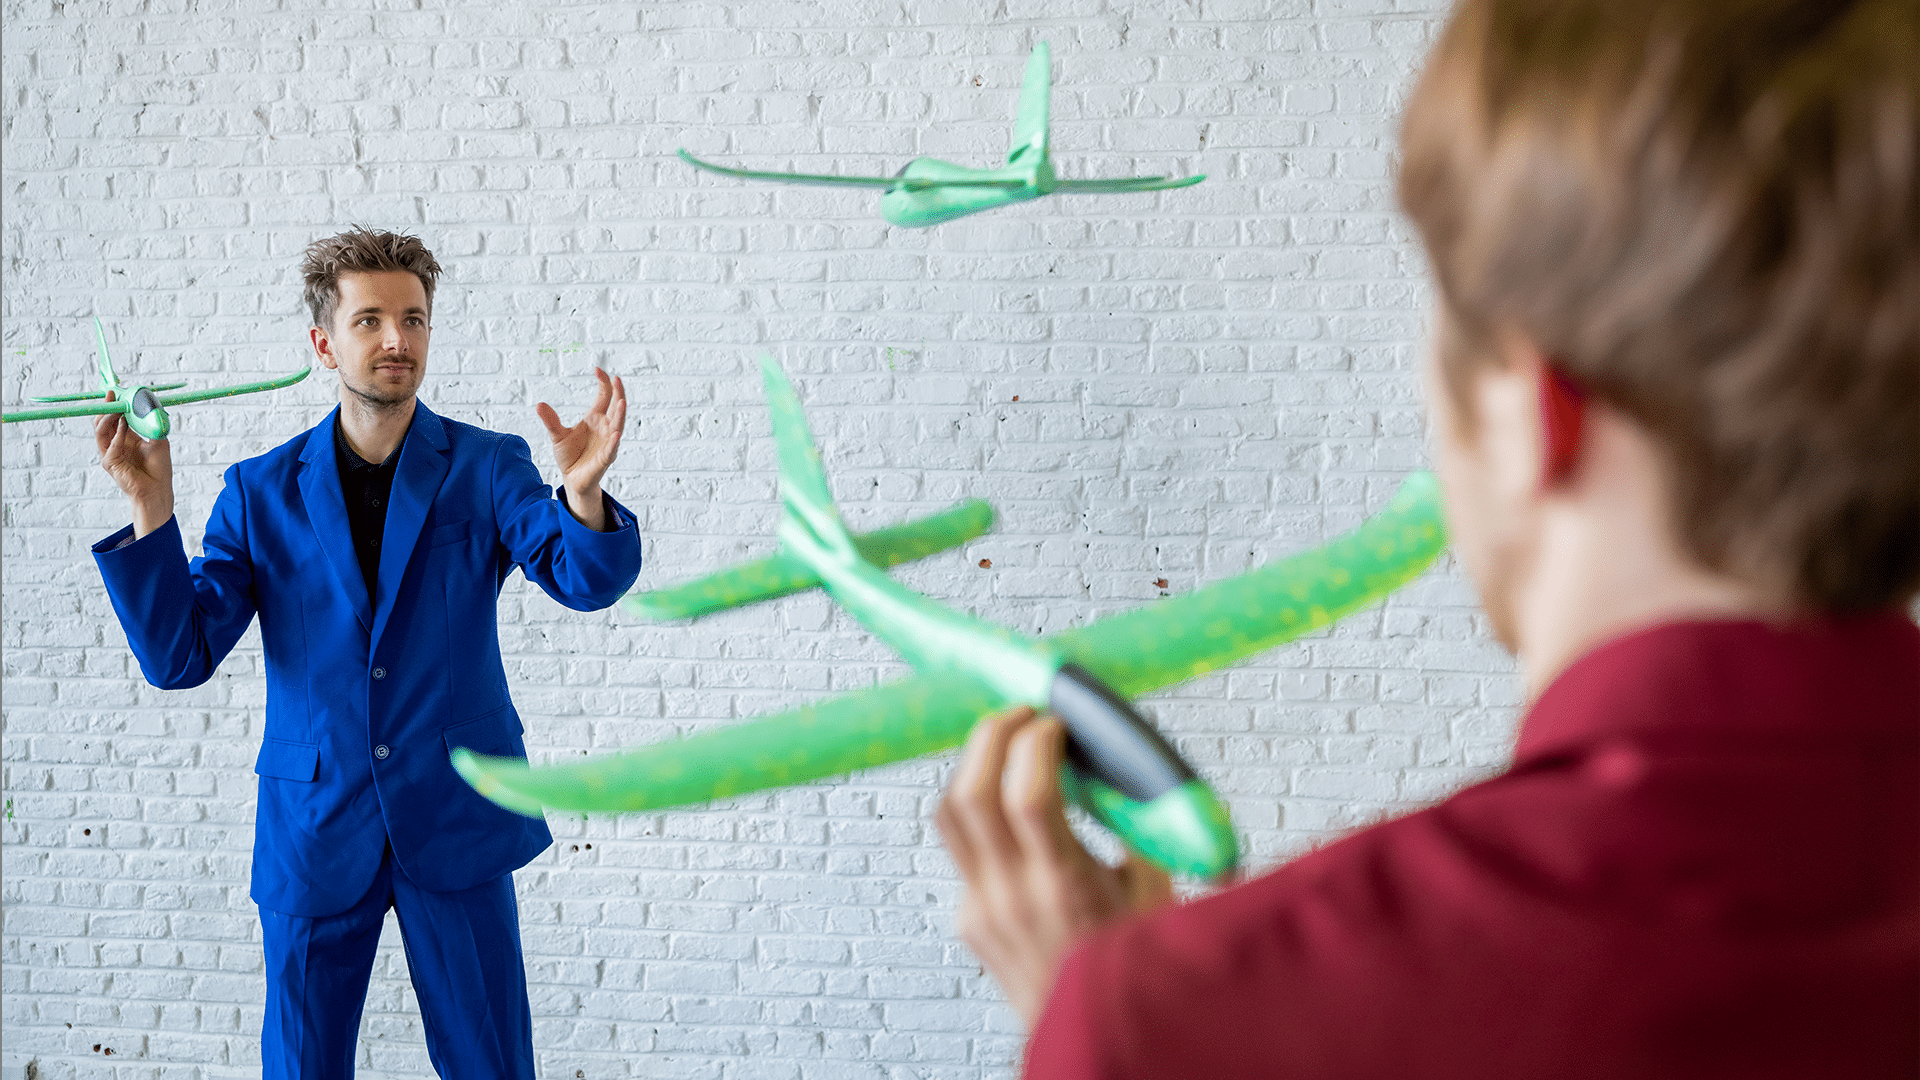 Two performers throw green miniature aeroplanes between each other.